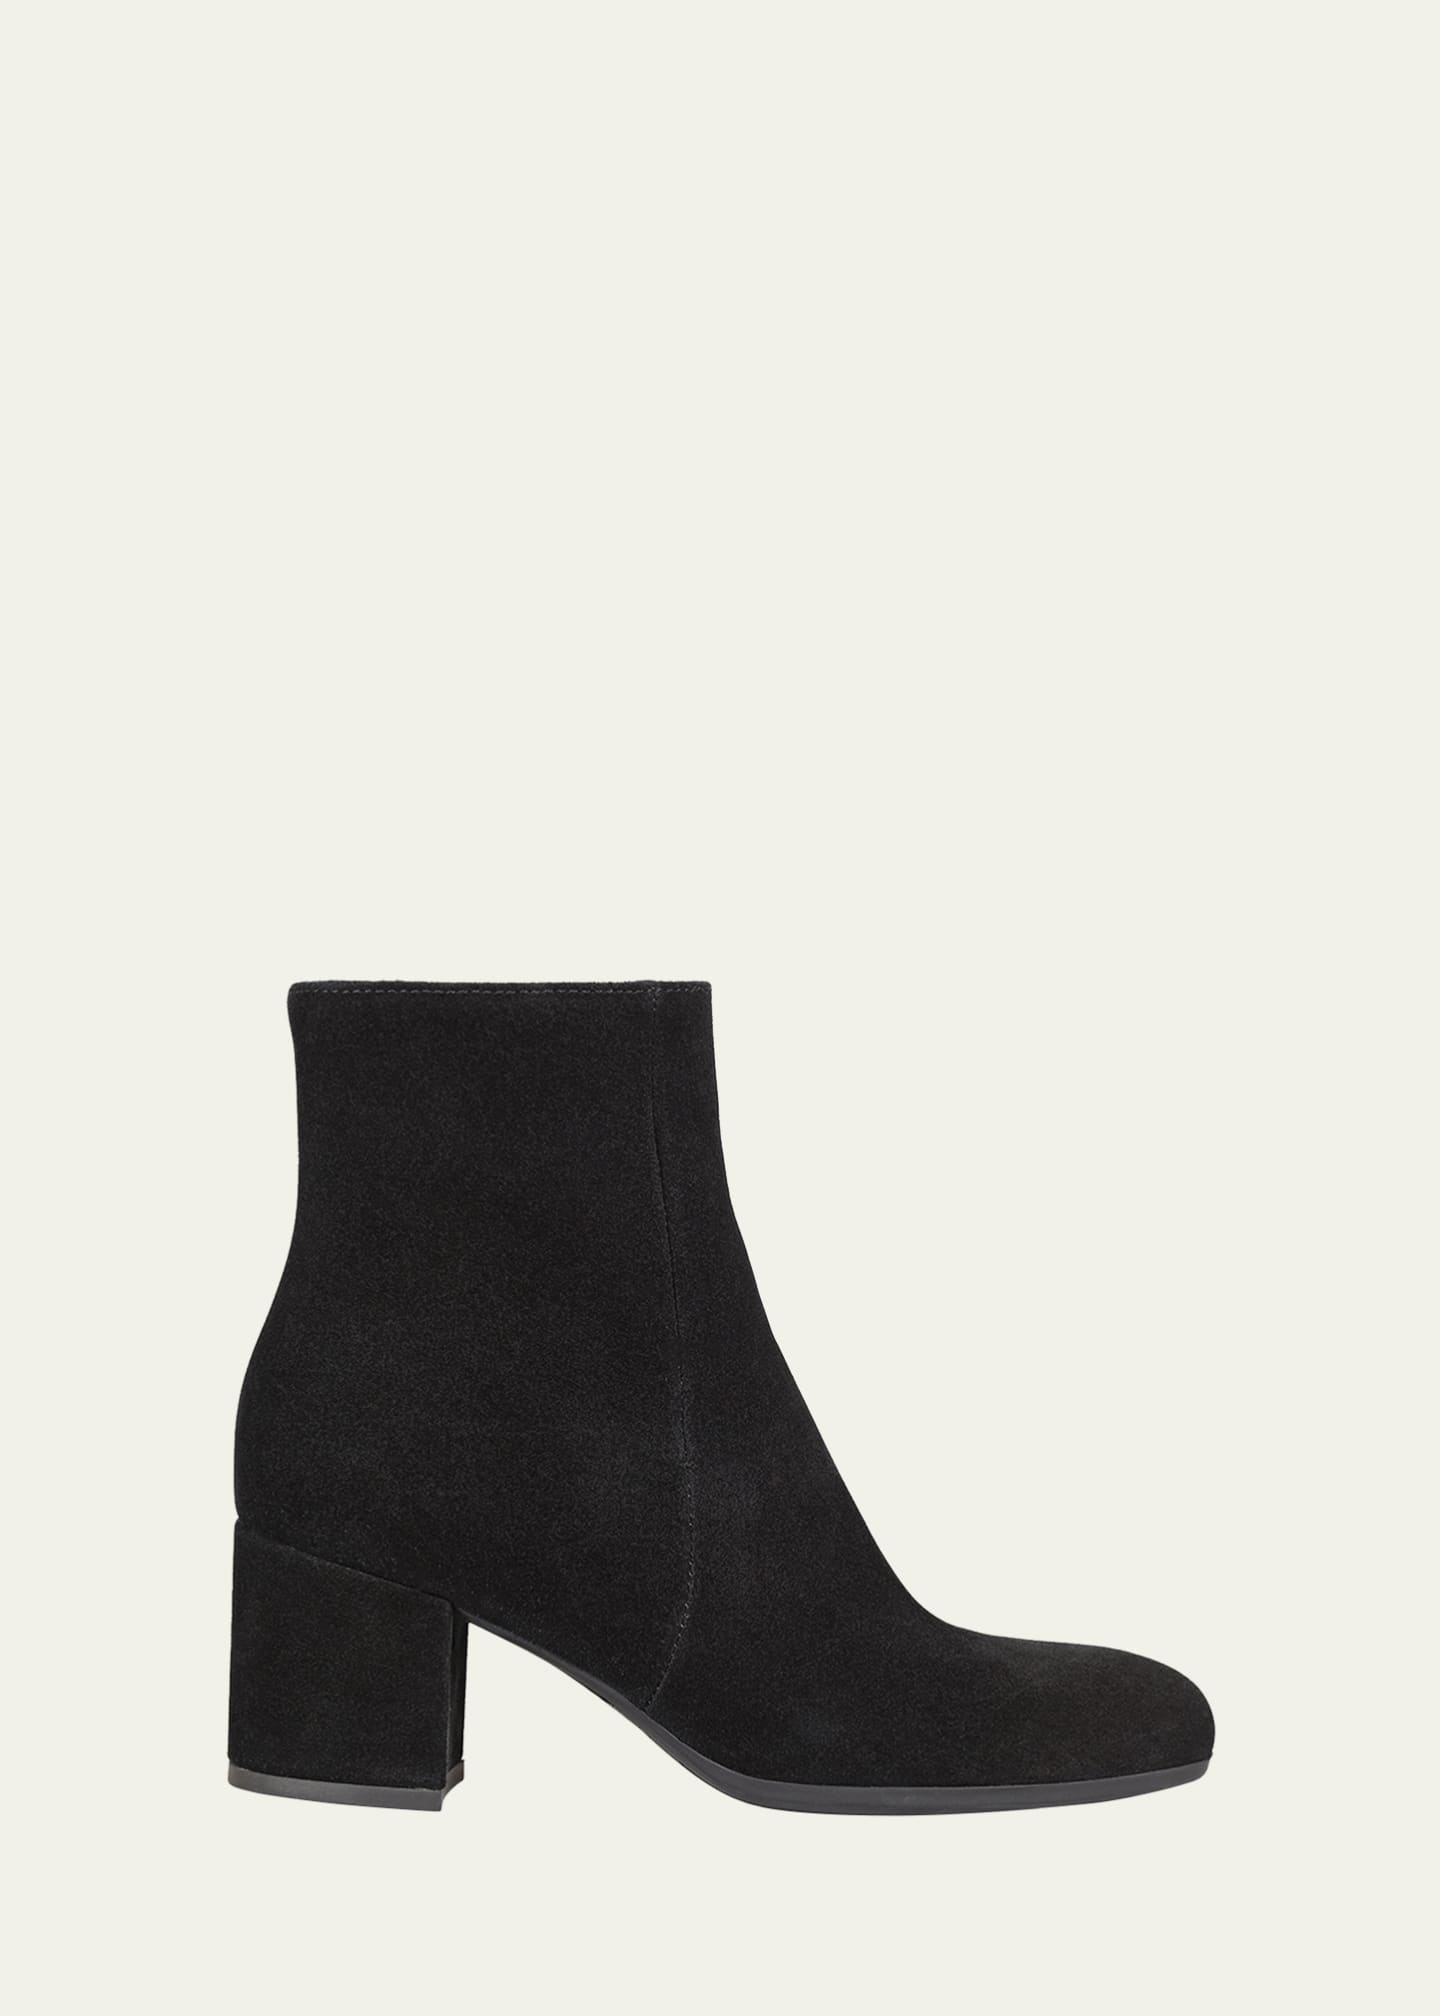 La Canadienne Joanie Suede Ankle Booties Image 1 of 2